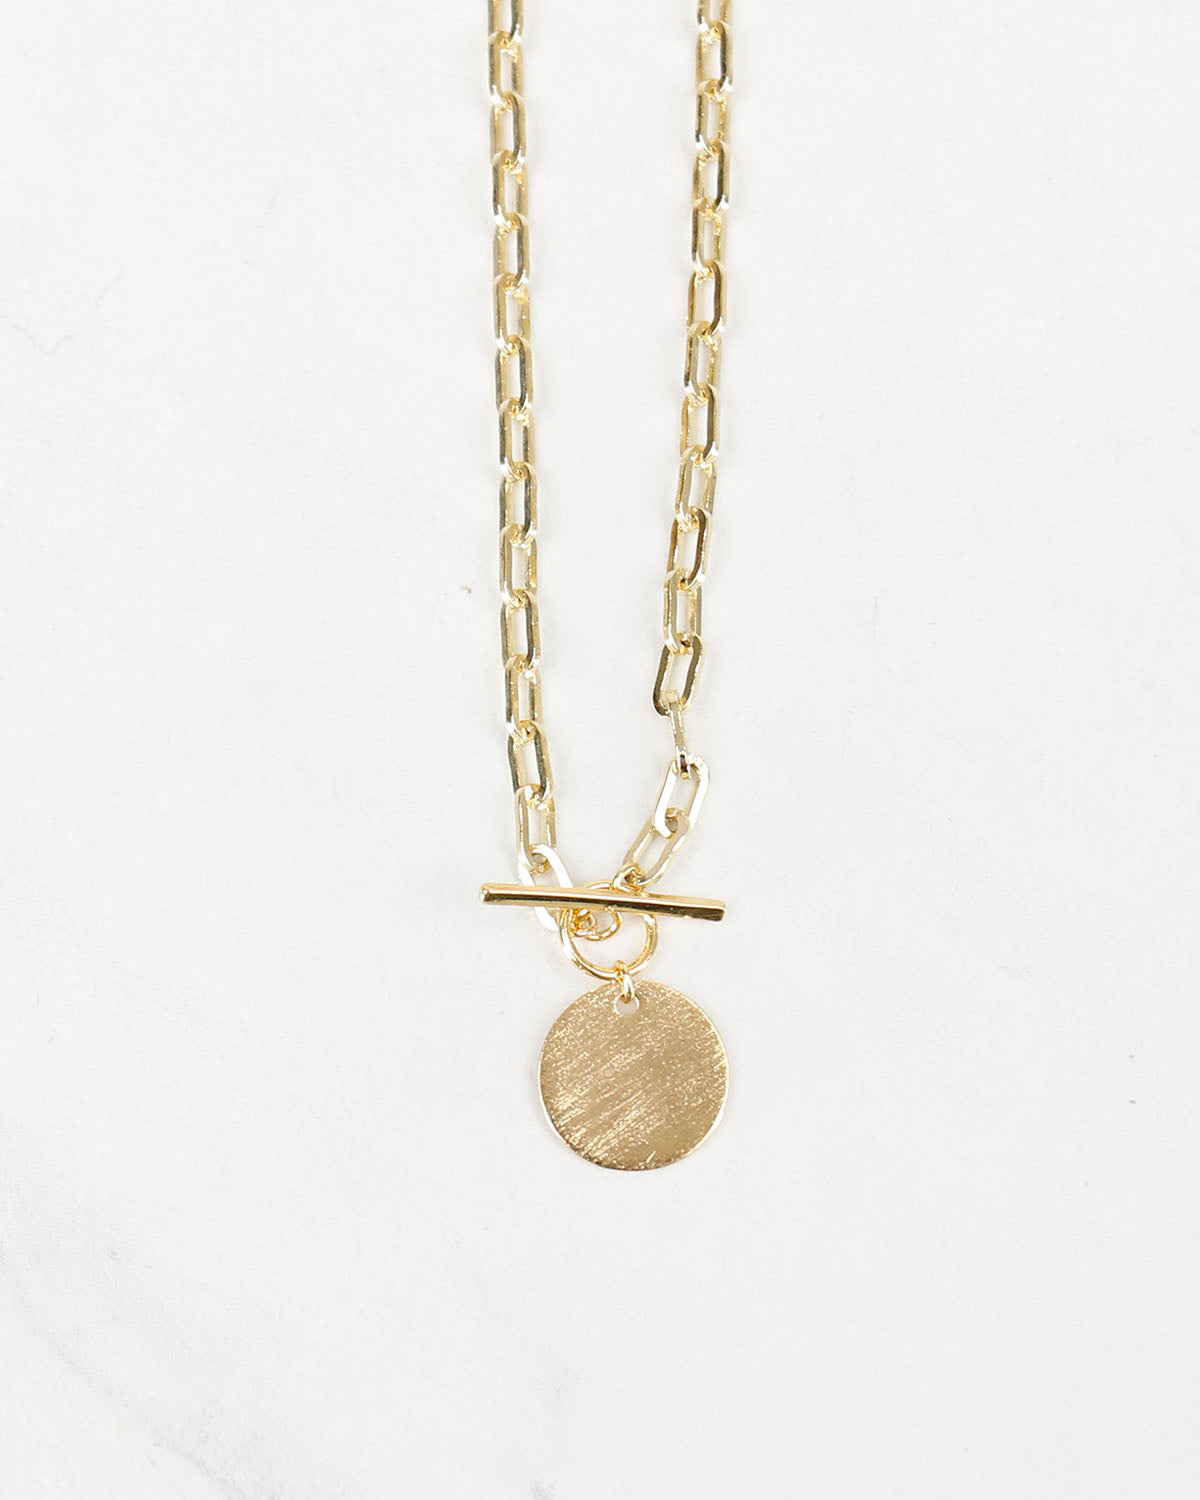 Ring & Bar Pendant Necklace in Gold